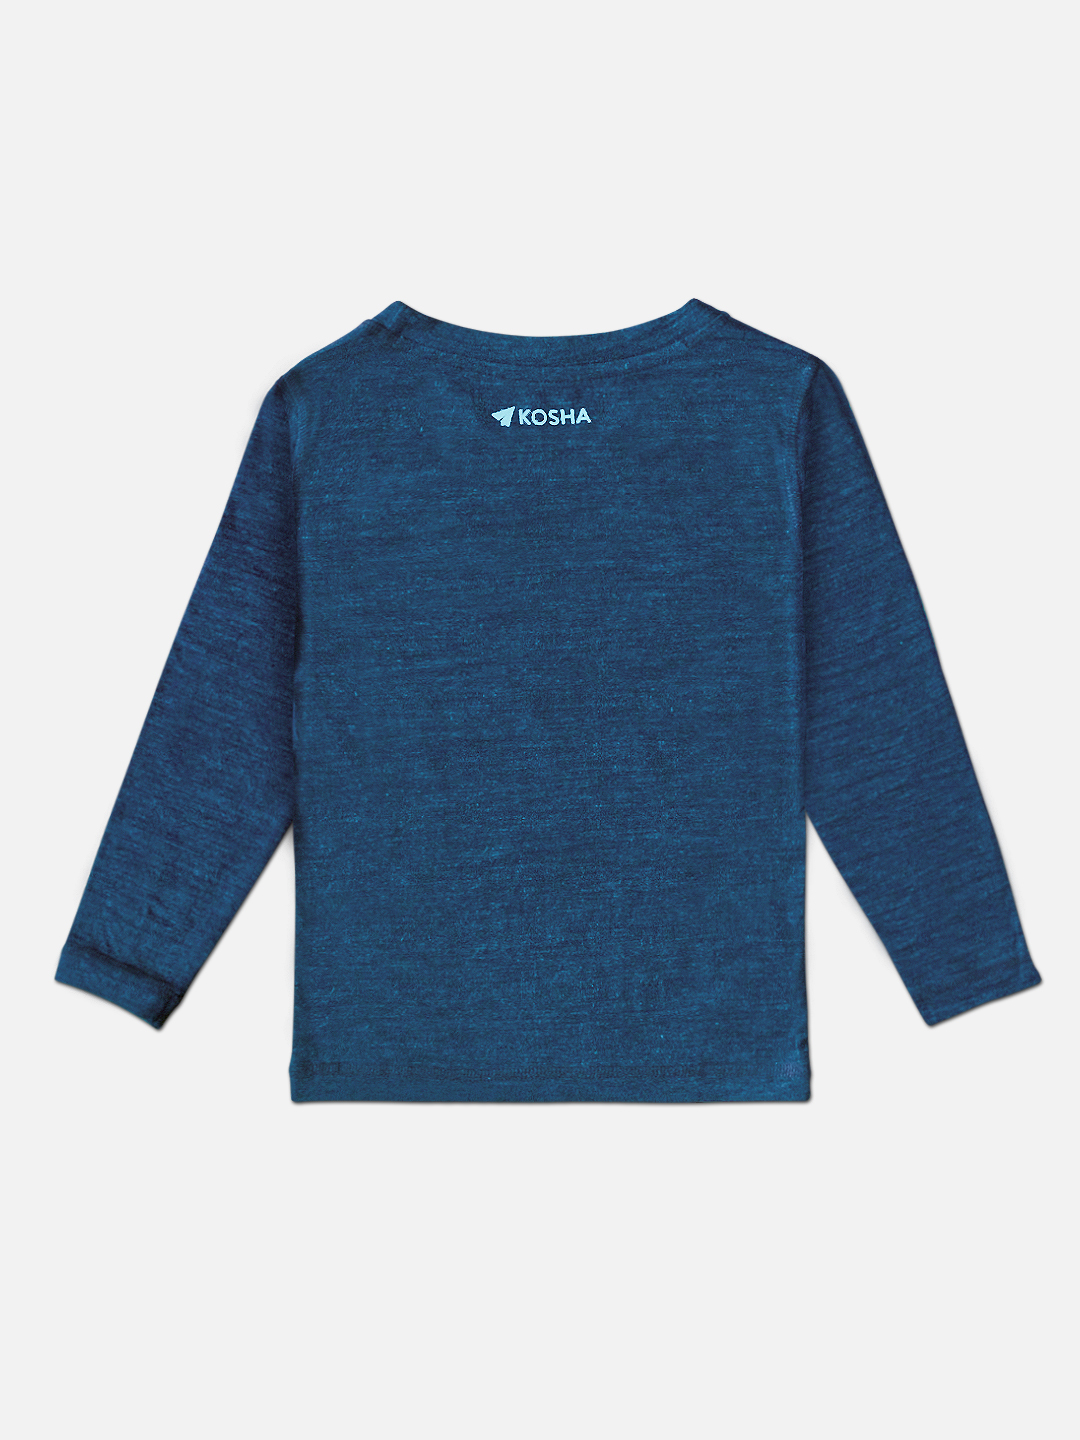 Blue Merino Wool and Bamboo Full Sleeves Thermal Top | Unisex 